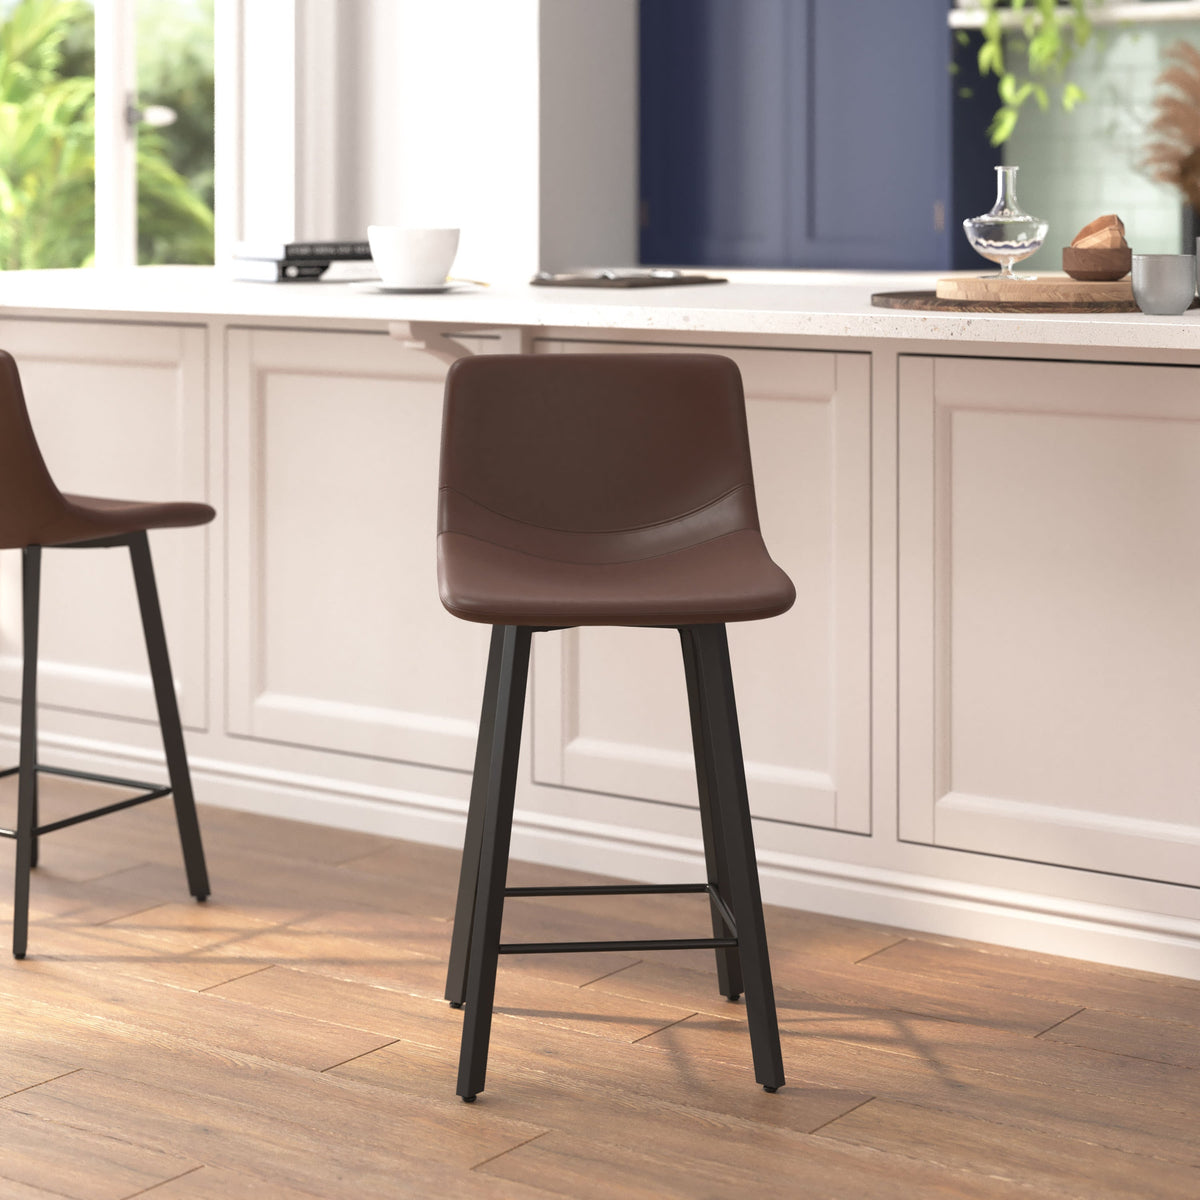 Chocolate Brown LeatherSoft |#| Set of 2 Commercial Armless Metal Counter Stools - Chocolate Brown LeatherSoft